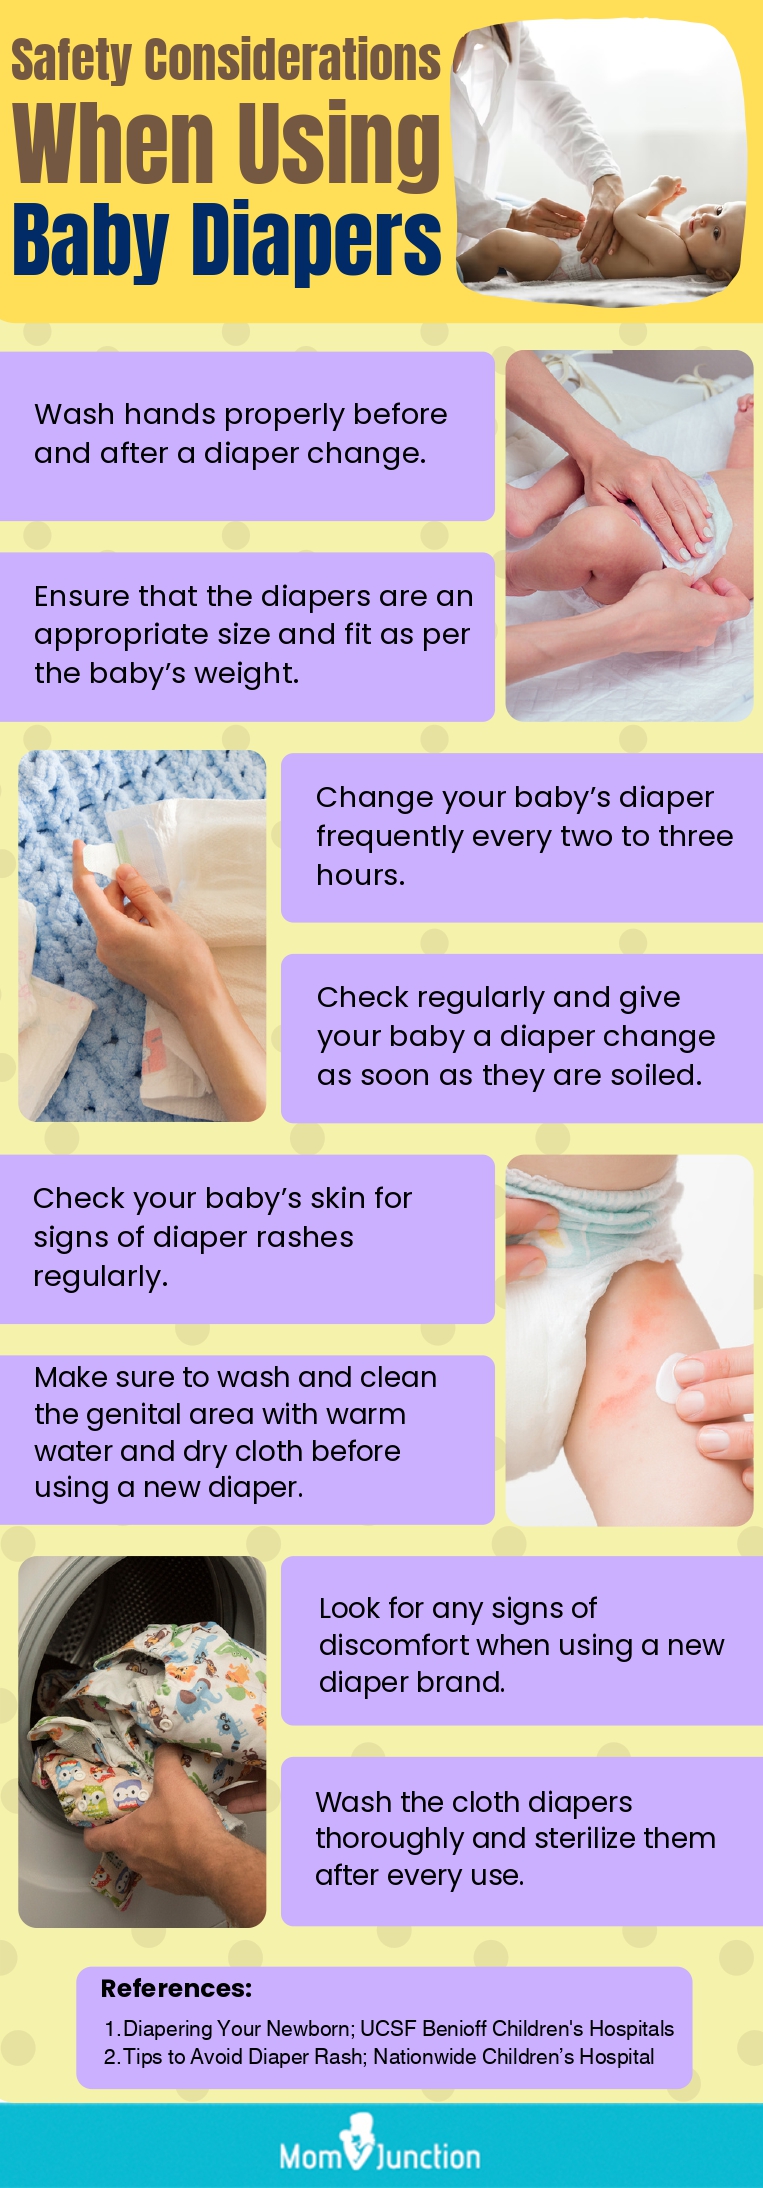 Safety Considerations When Using Baby Diapers (infographic)